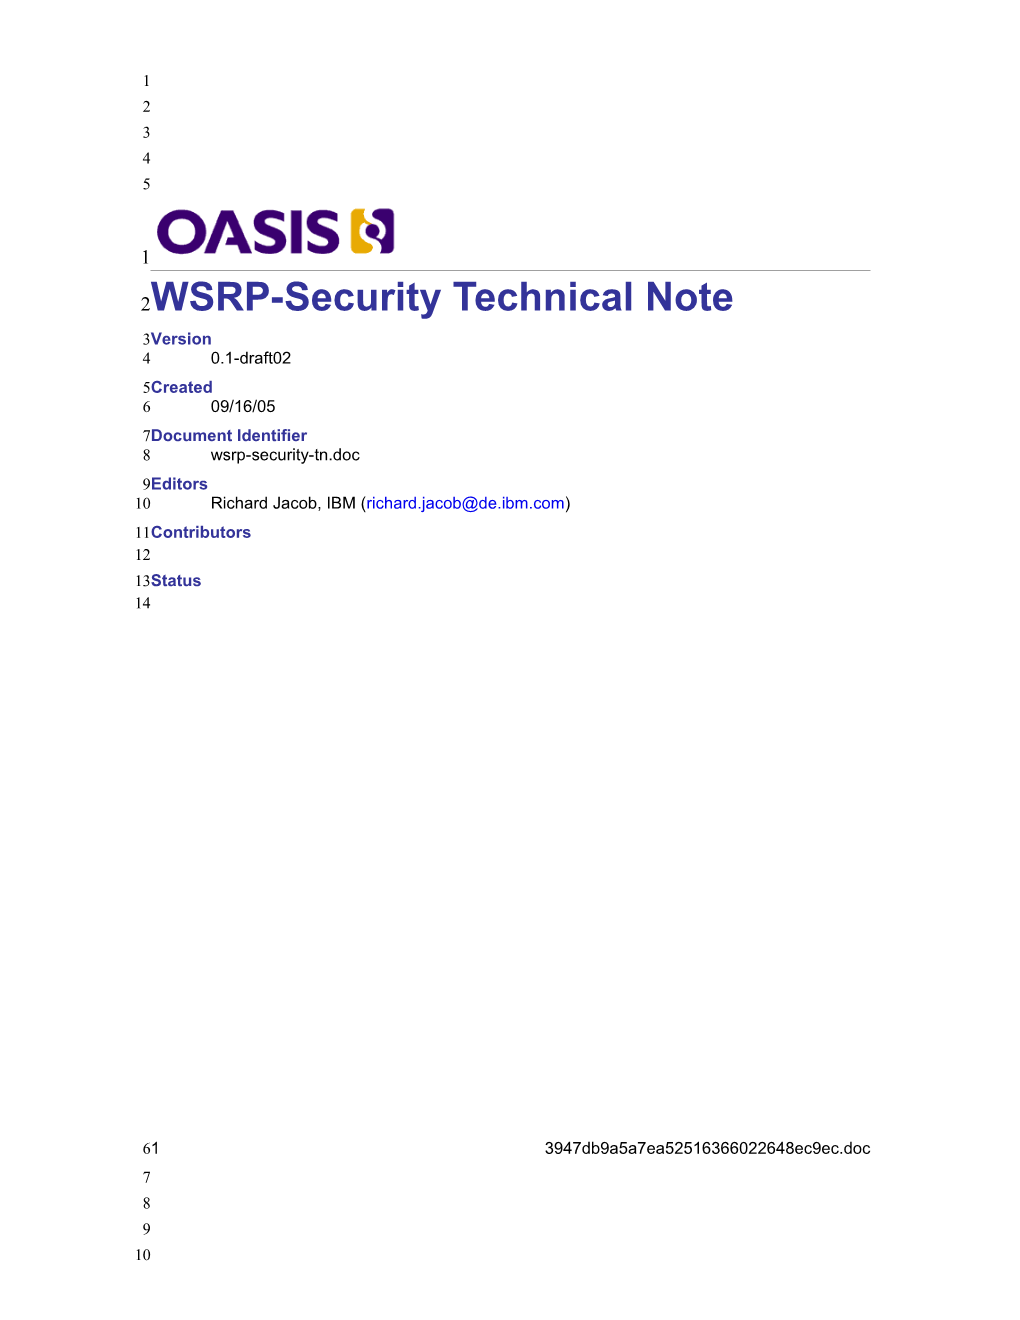 WSRP-Security Technical Note